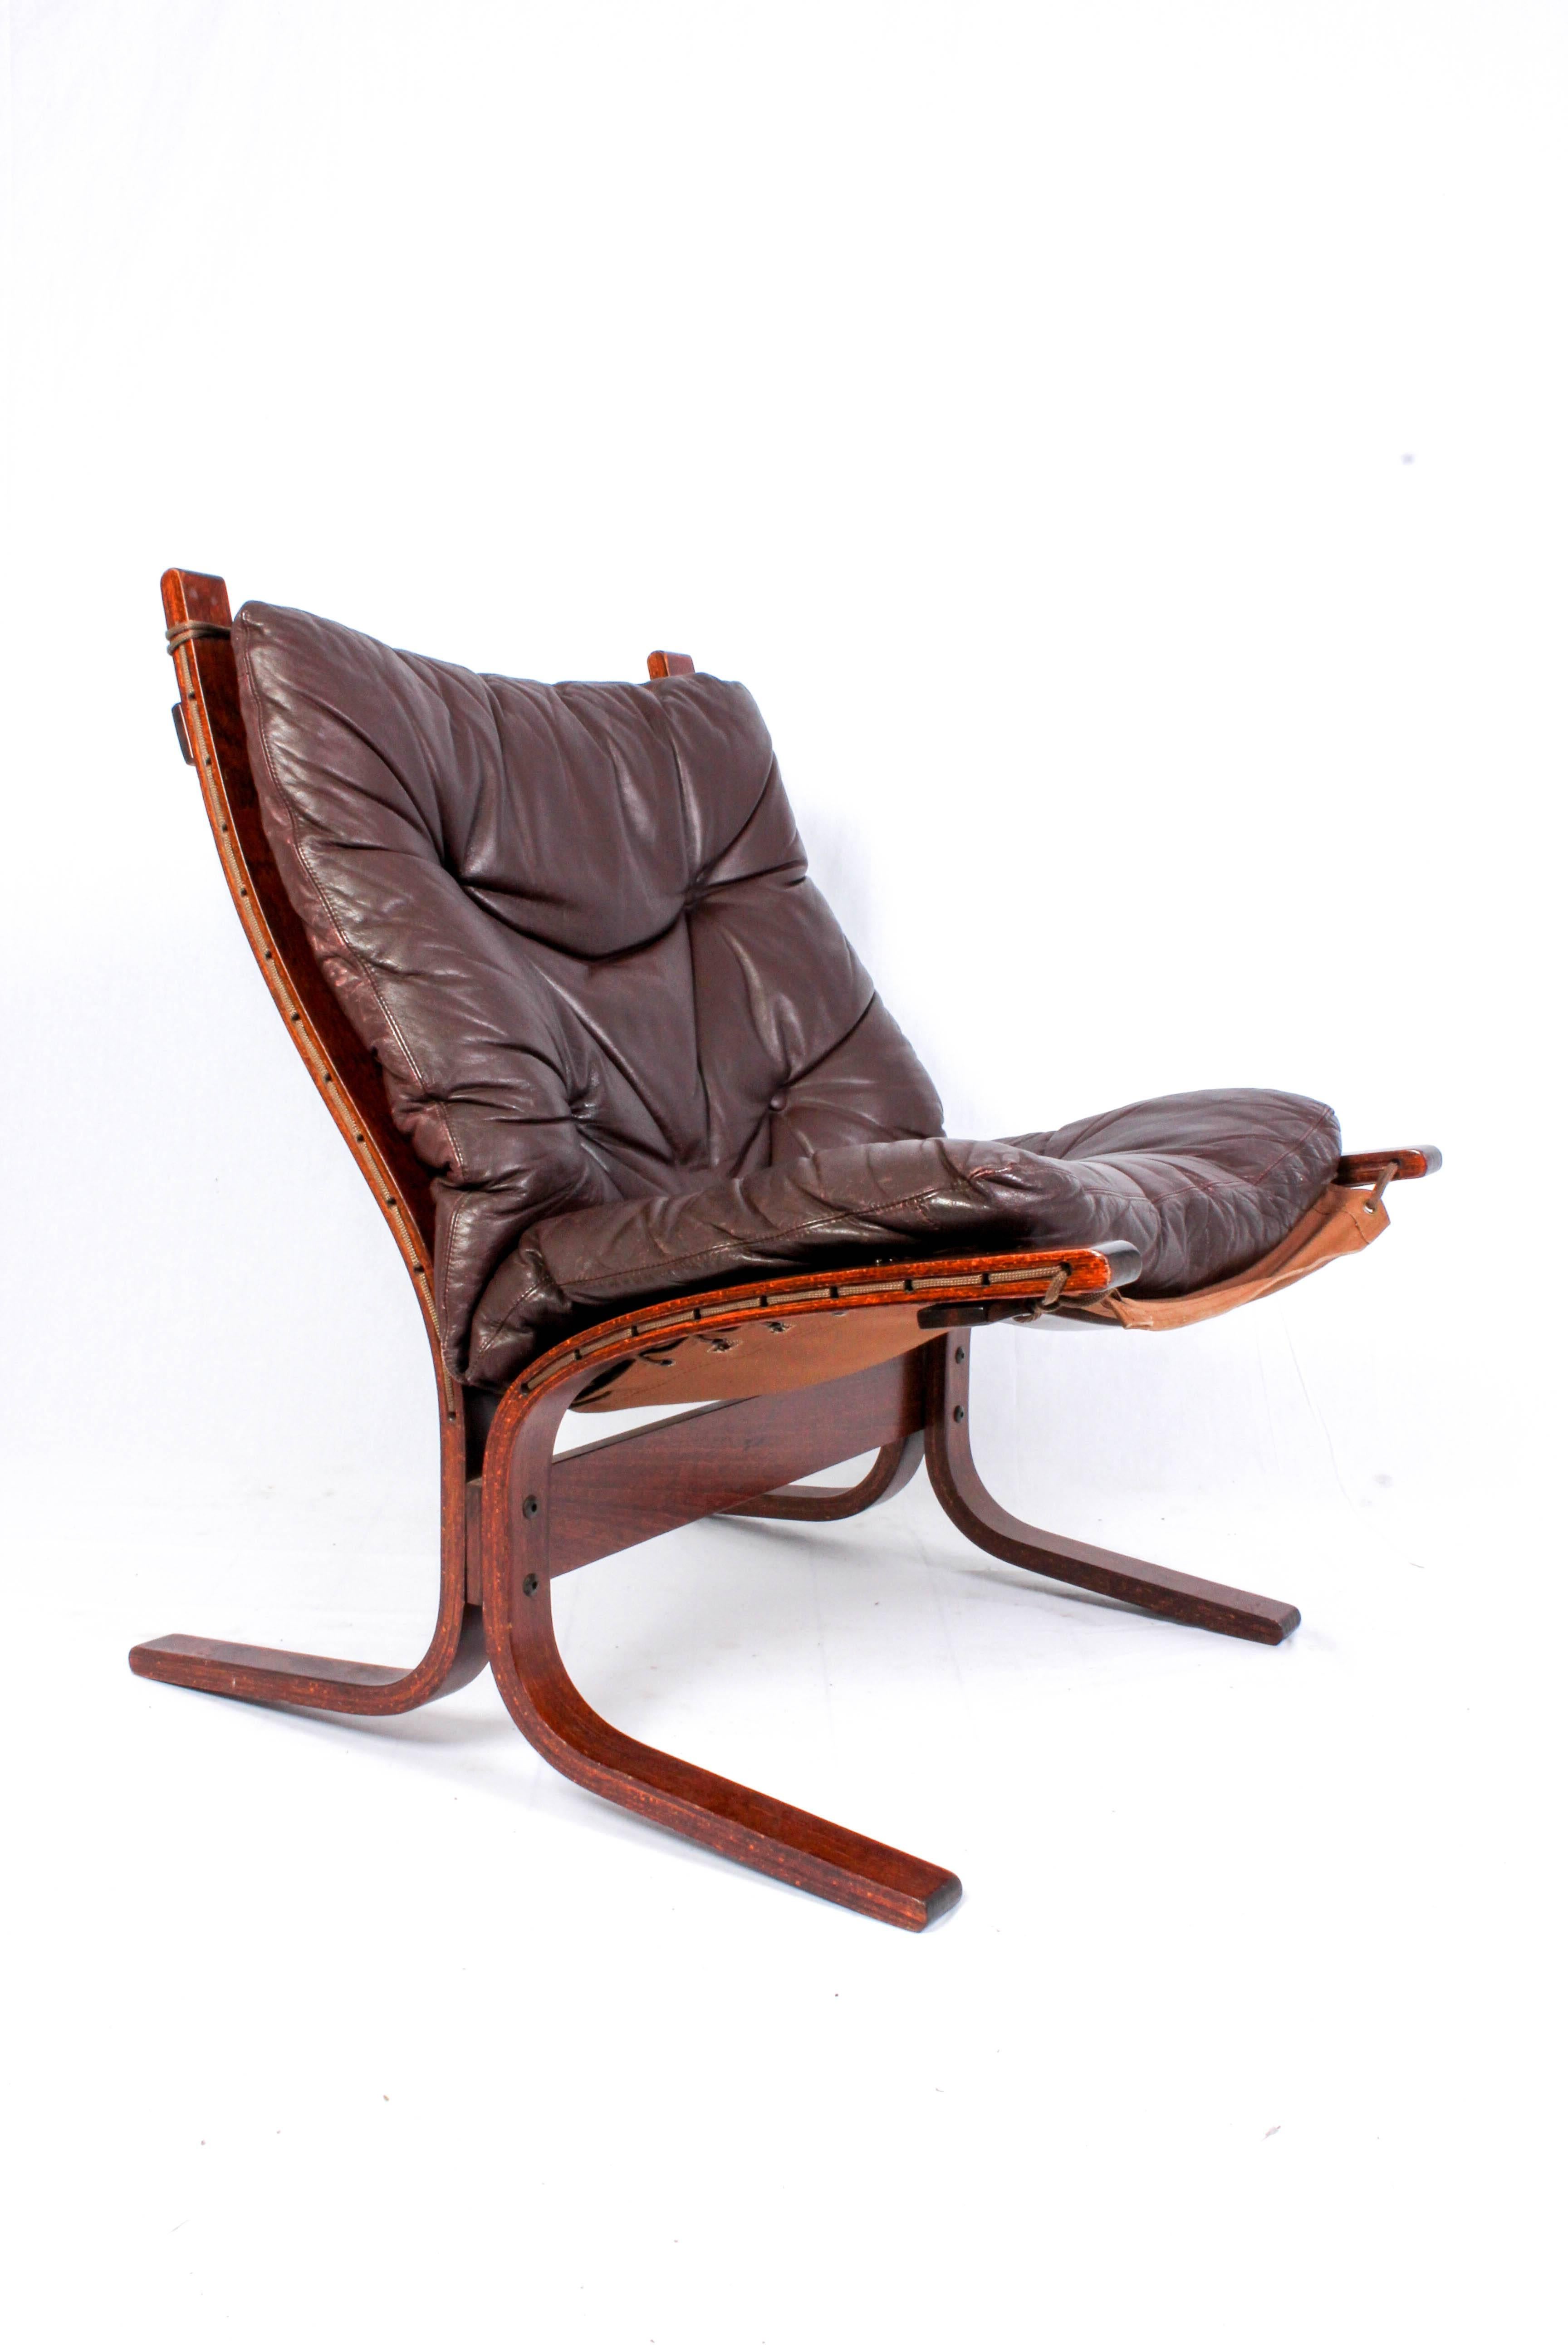 Midcentury leather lounge chair by Ingmar Relling for Westnofa, Norway. The model is called Siesta and is made out of bentwood, leather and canvas. The chair is in very good vintage condition with min or signs of usage.

This item will be available